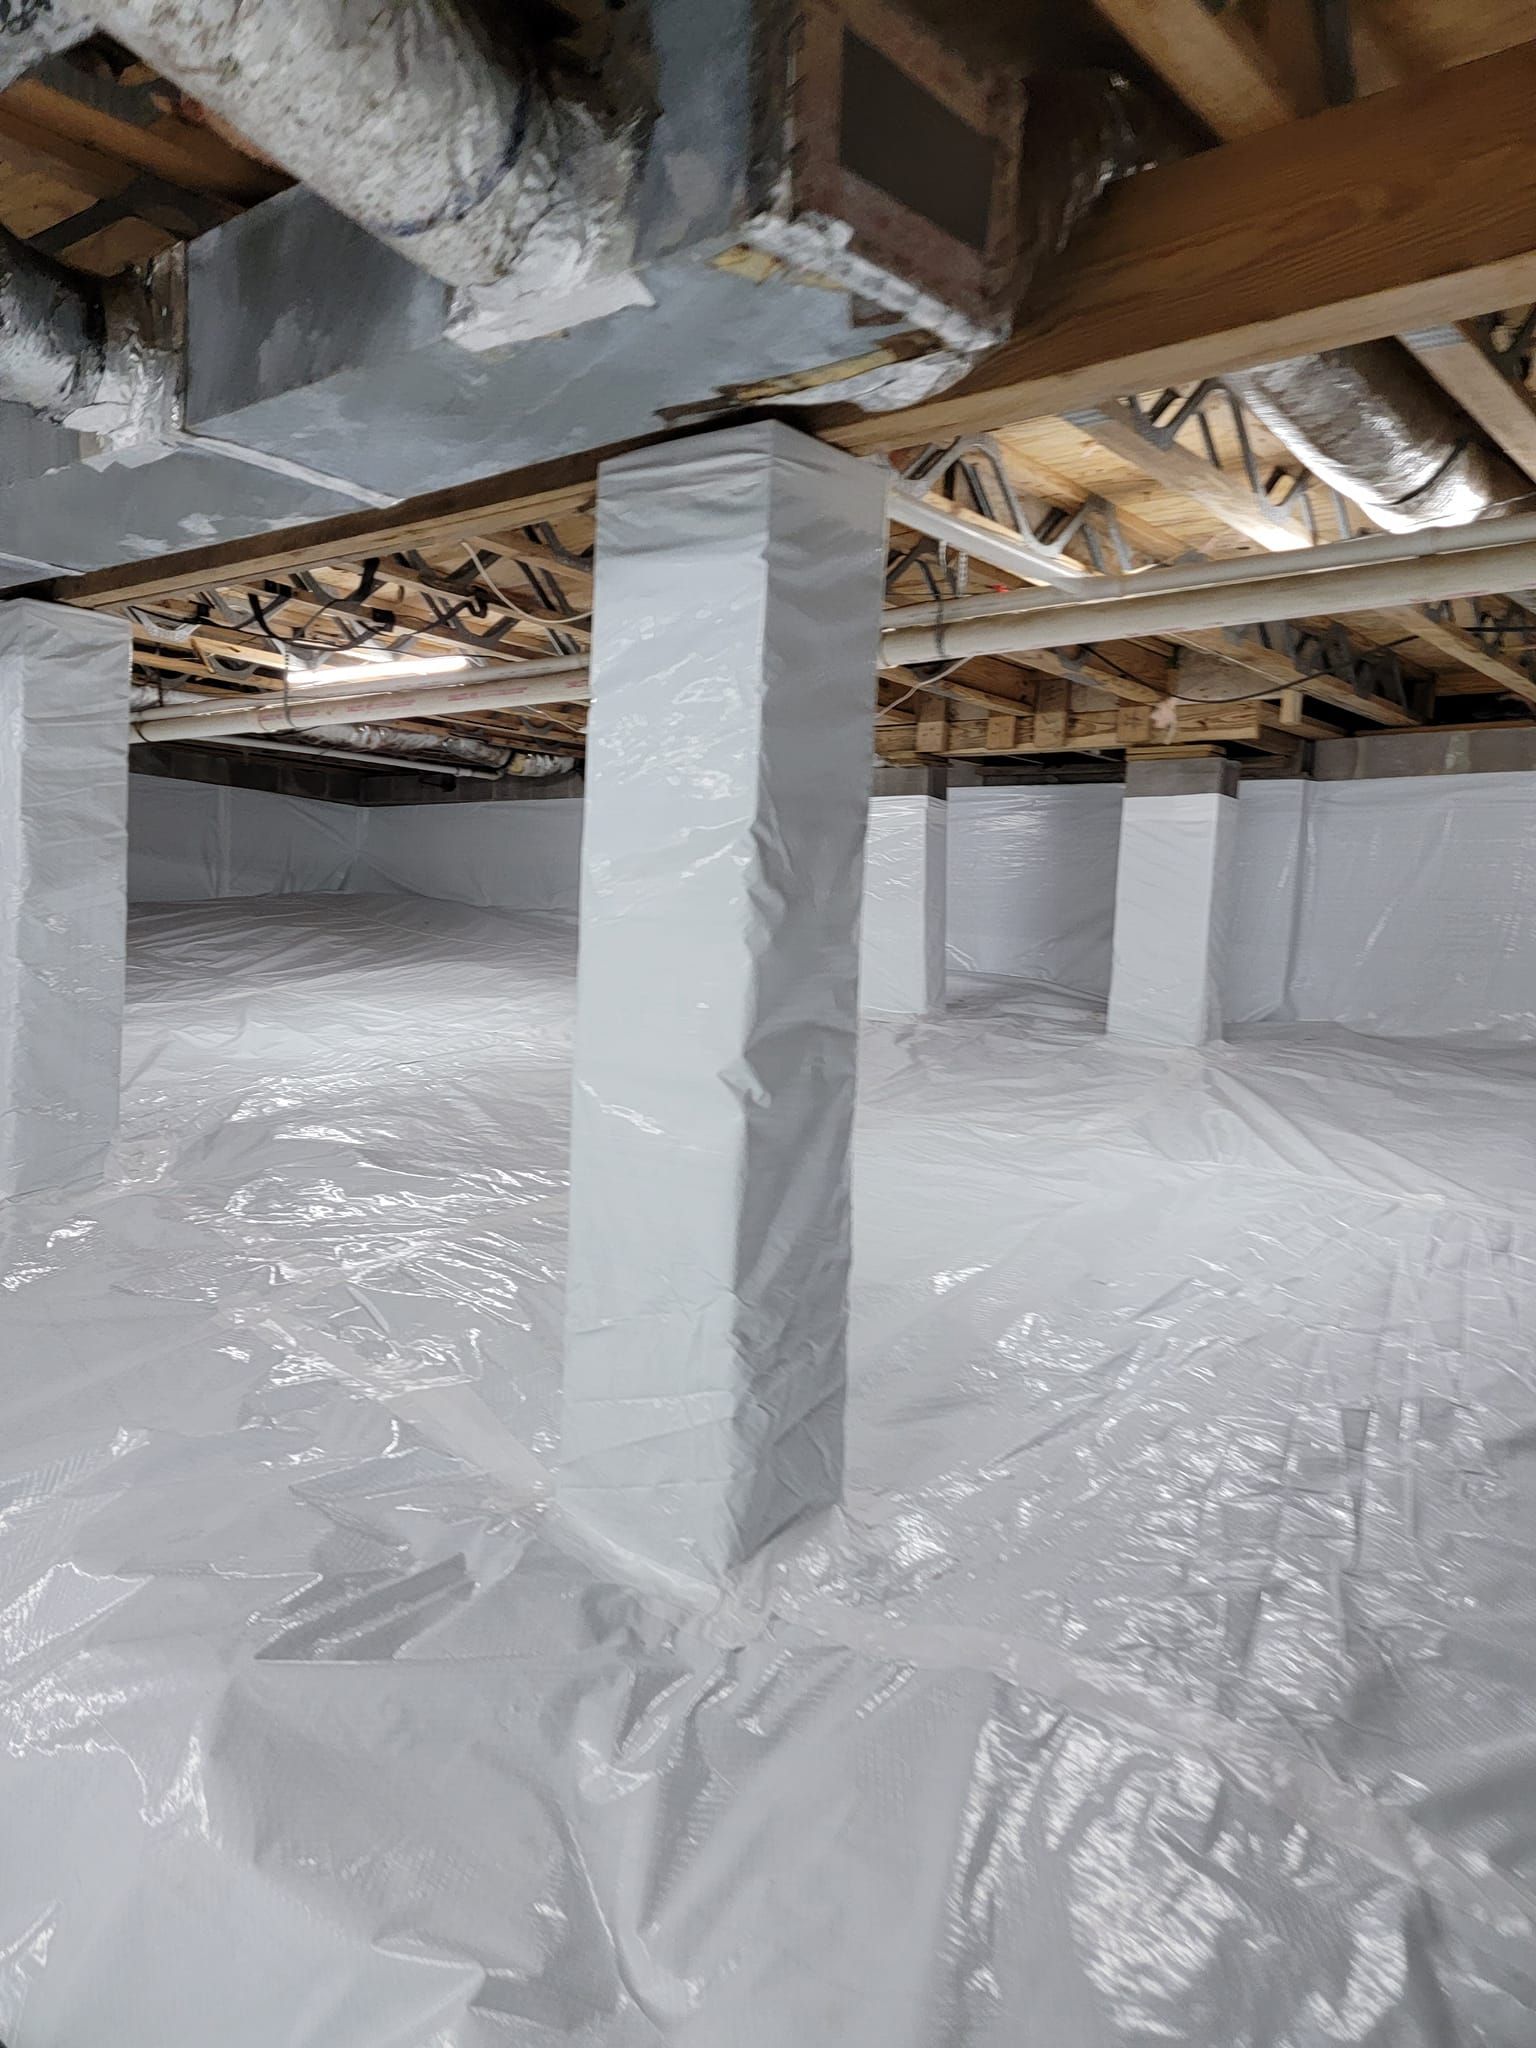 the foundation of a house is covered in plastic .